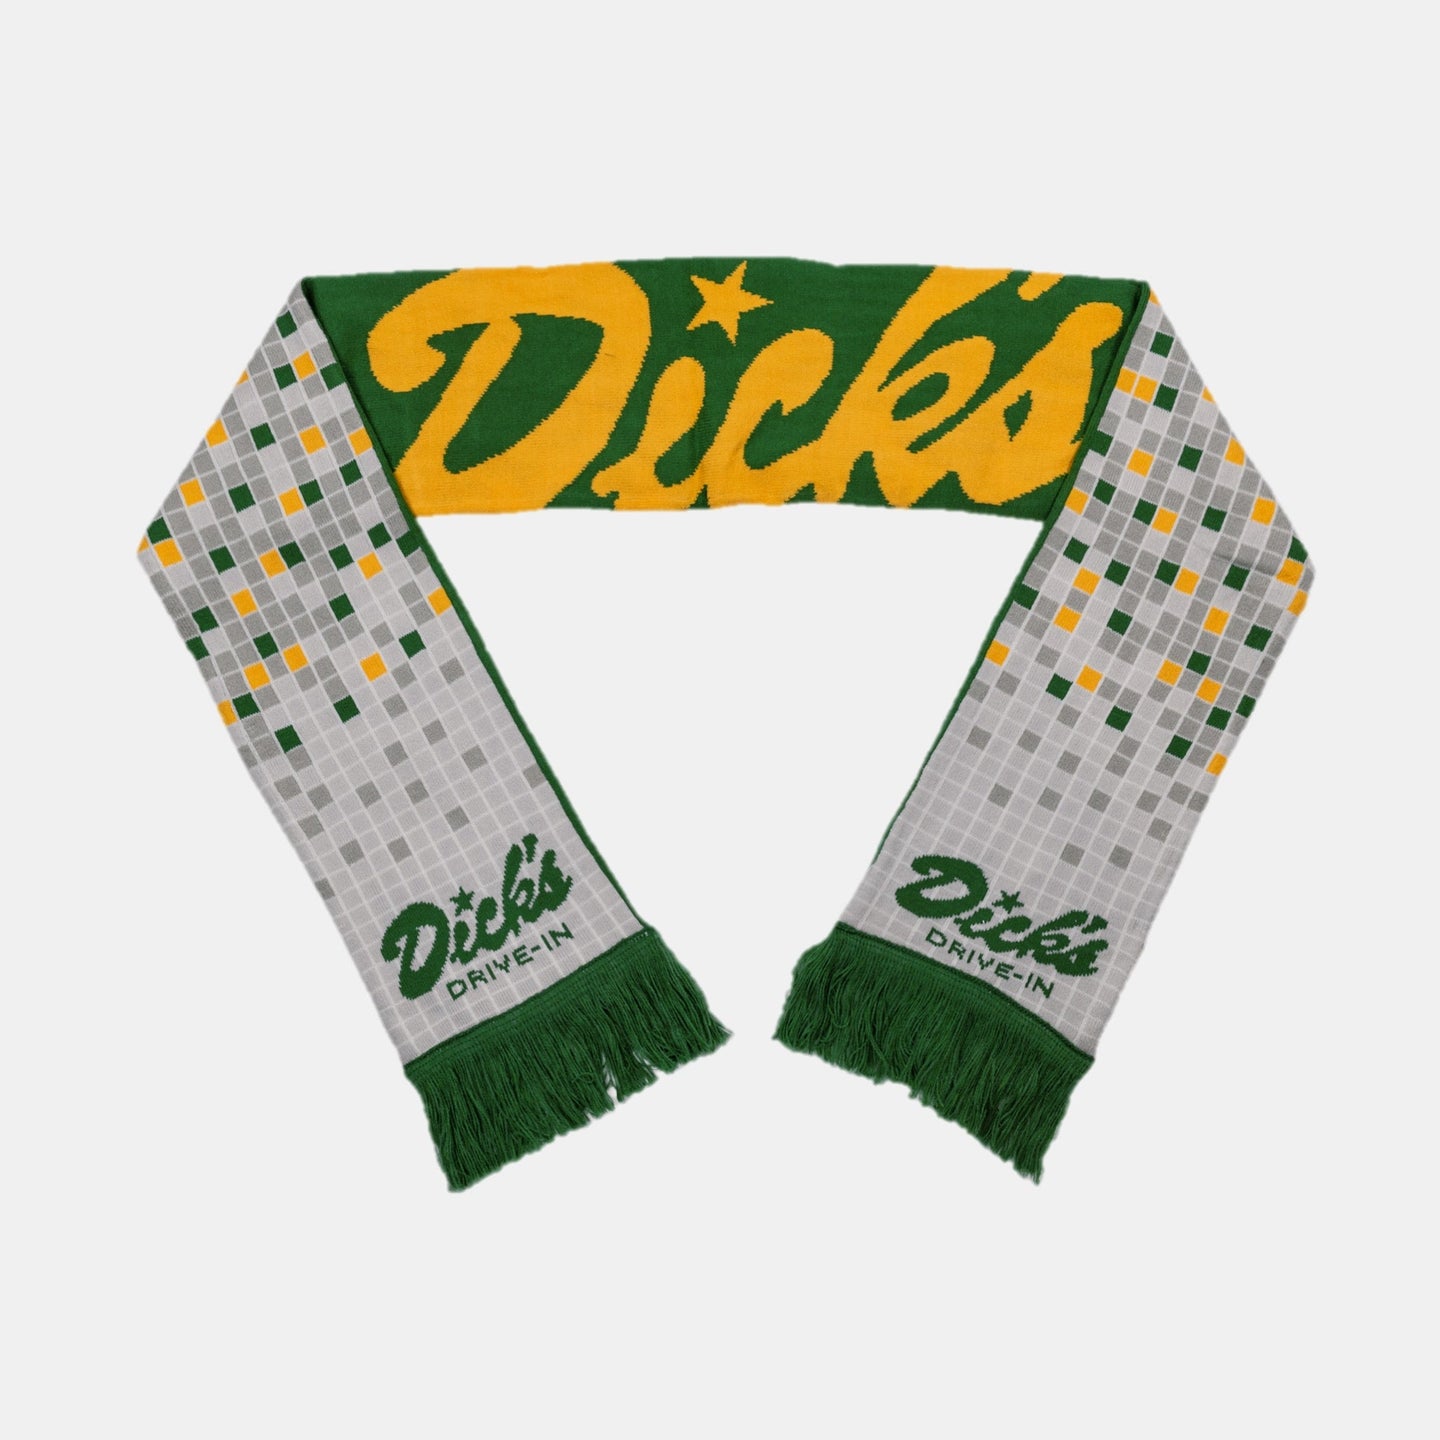 Dick's Drive-In green/yellow reversible woven scarf with square tile pattern on one side and Dick's script on the other